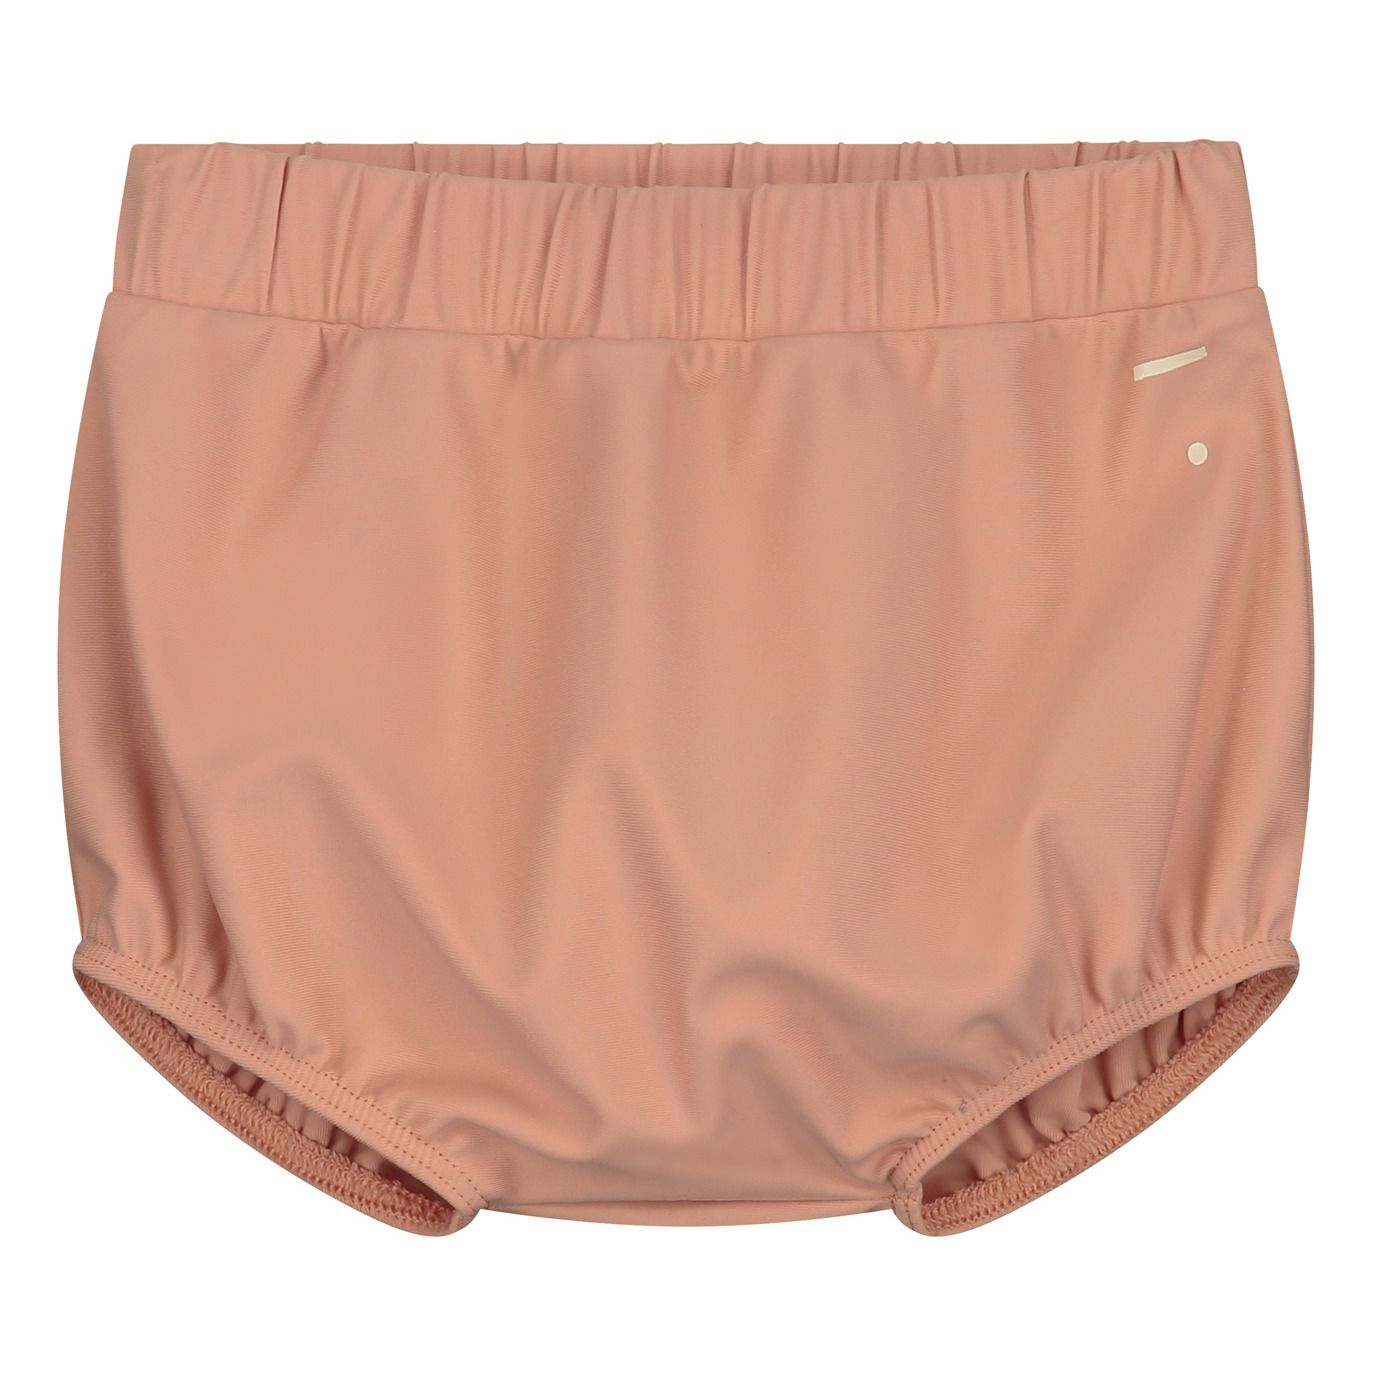 Gray Label - Bloomer Fibres Recyclées - Fille - Rose pêche